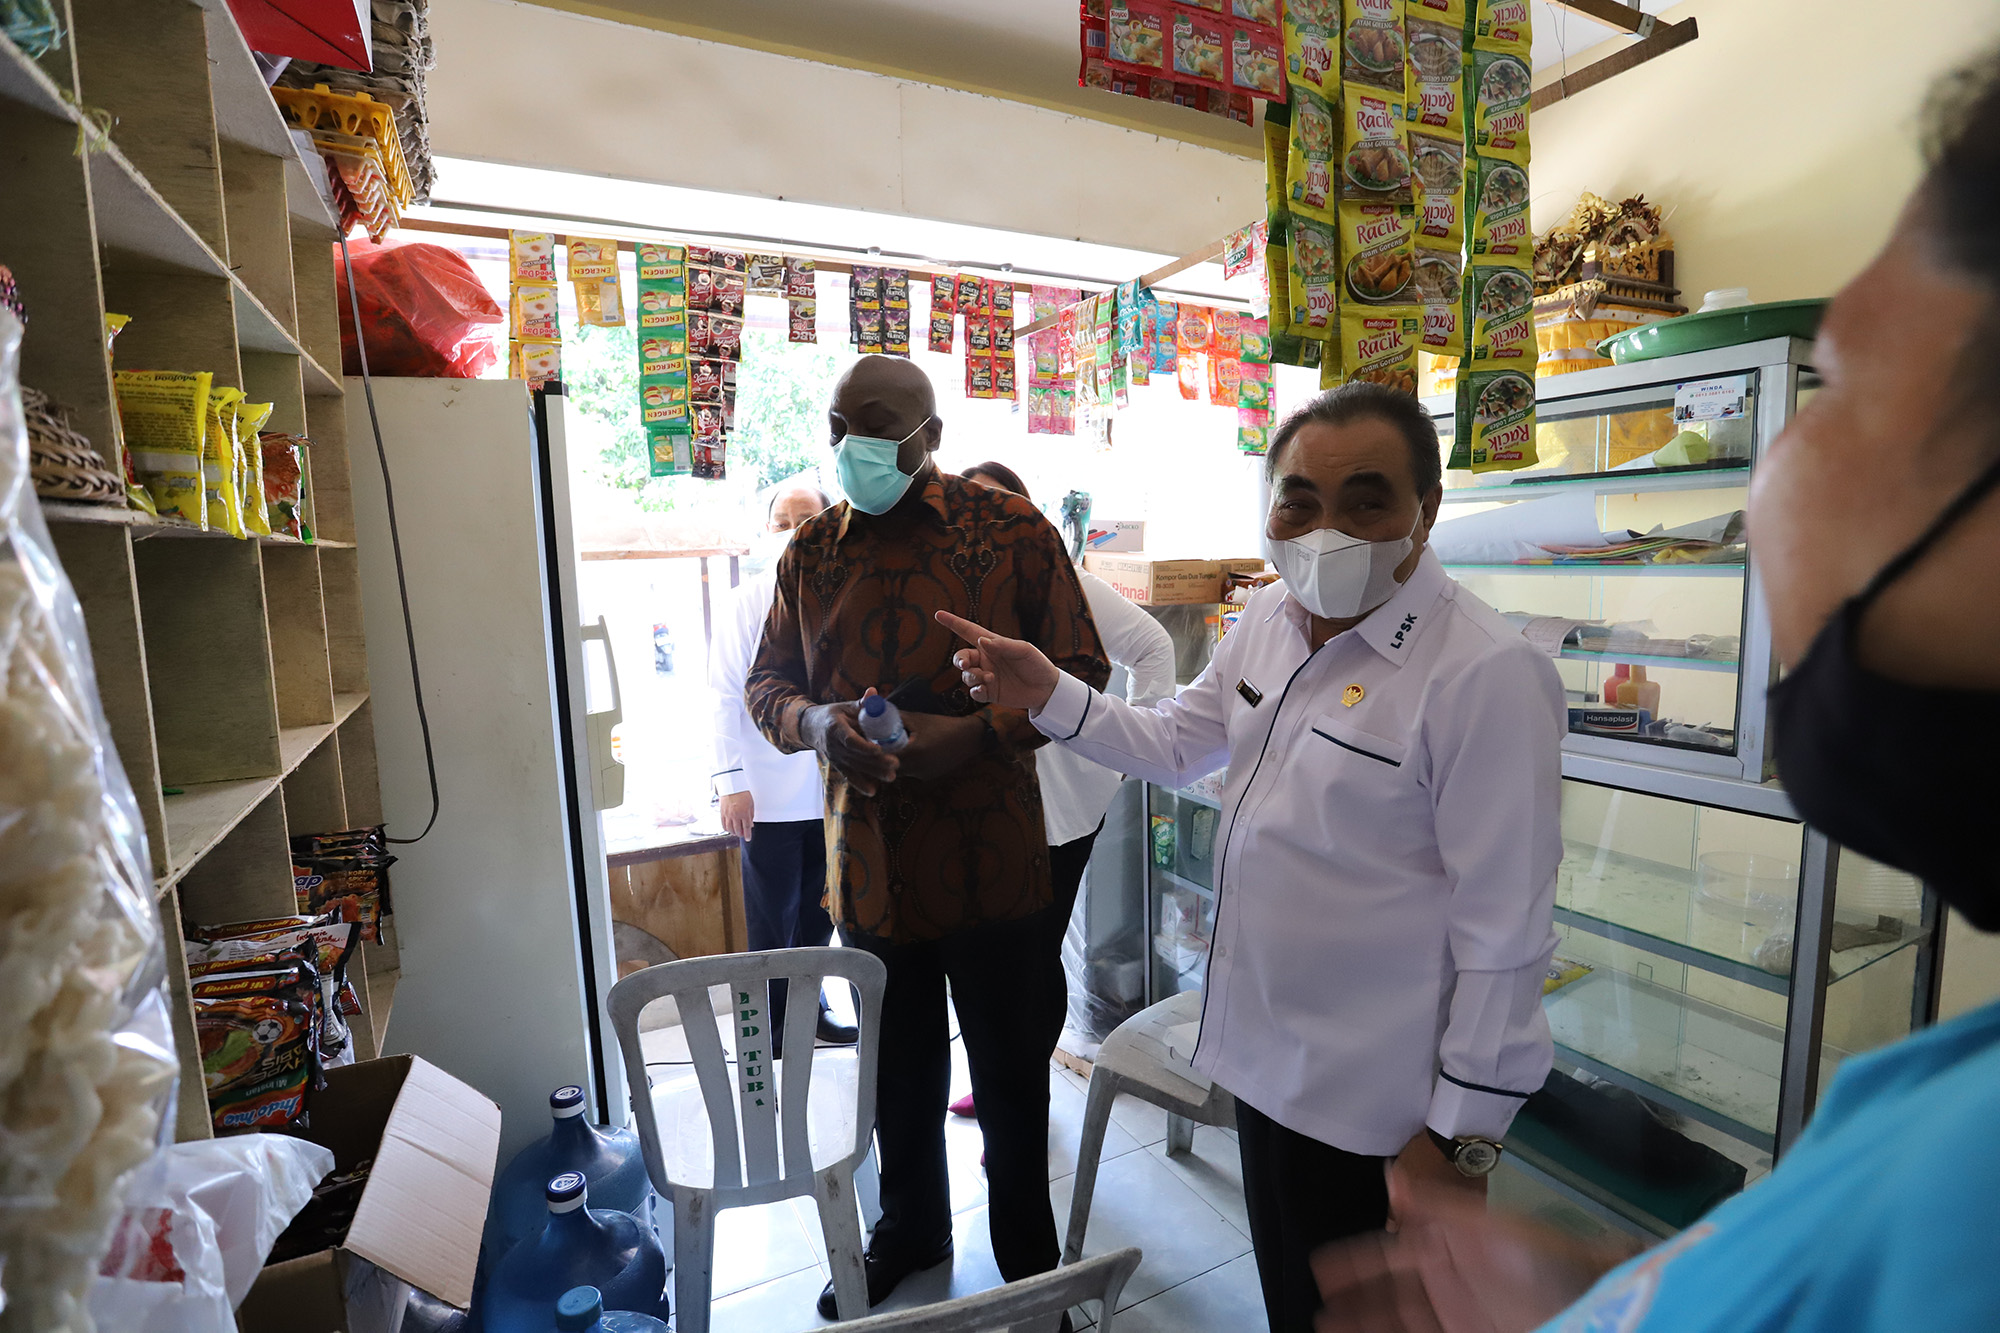 UNODC Indonesia Country Manager and Head of LPSK visited the location of one of the survivors’ small business